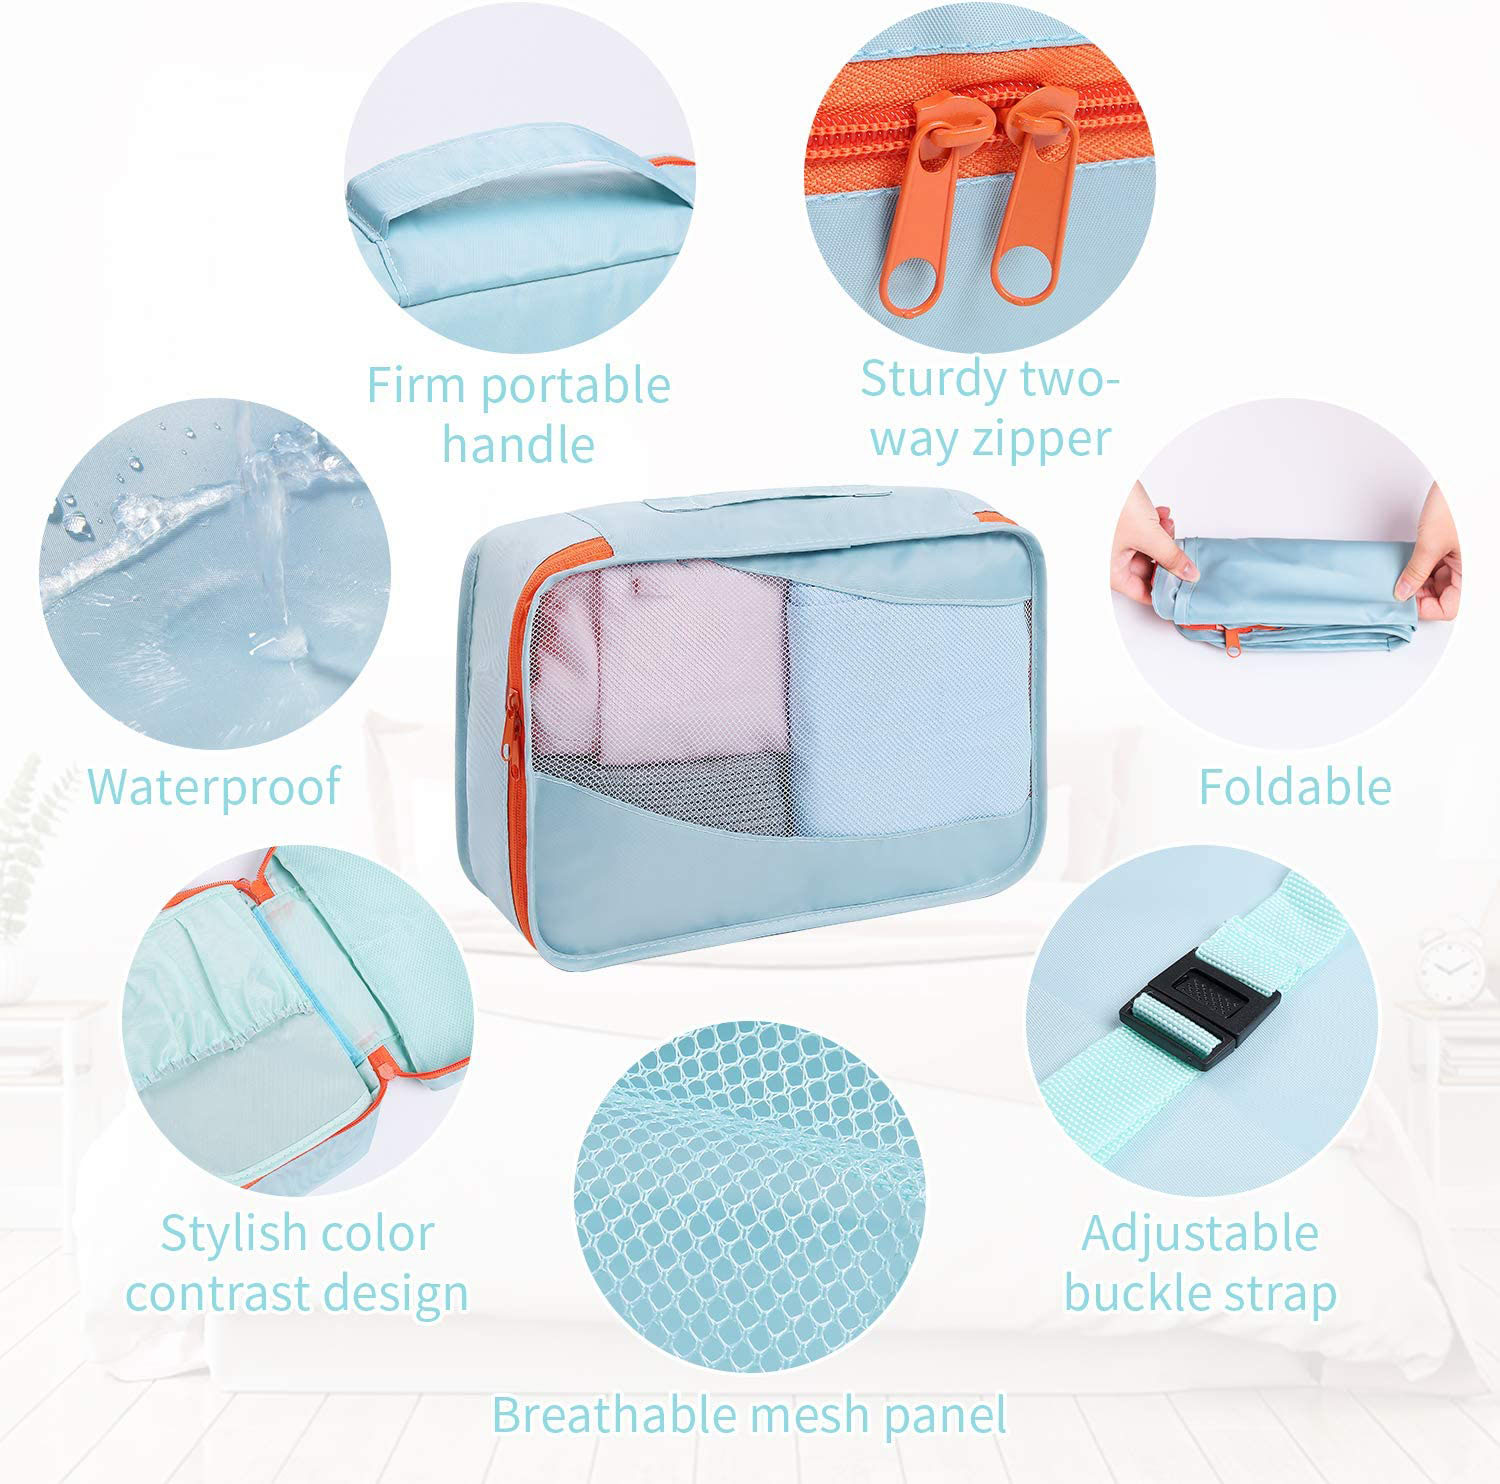 11 Set Packing Cubes Travel Luggage Packing Organizers Lightweight Travel Cloth Storage Bag with Bra Underwear Cube Cosmetics